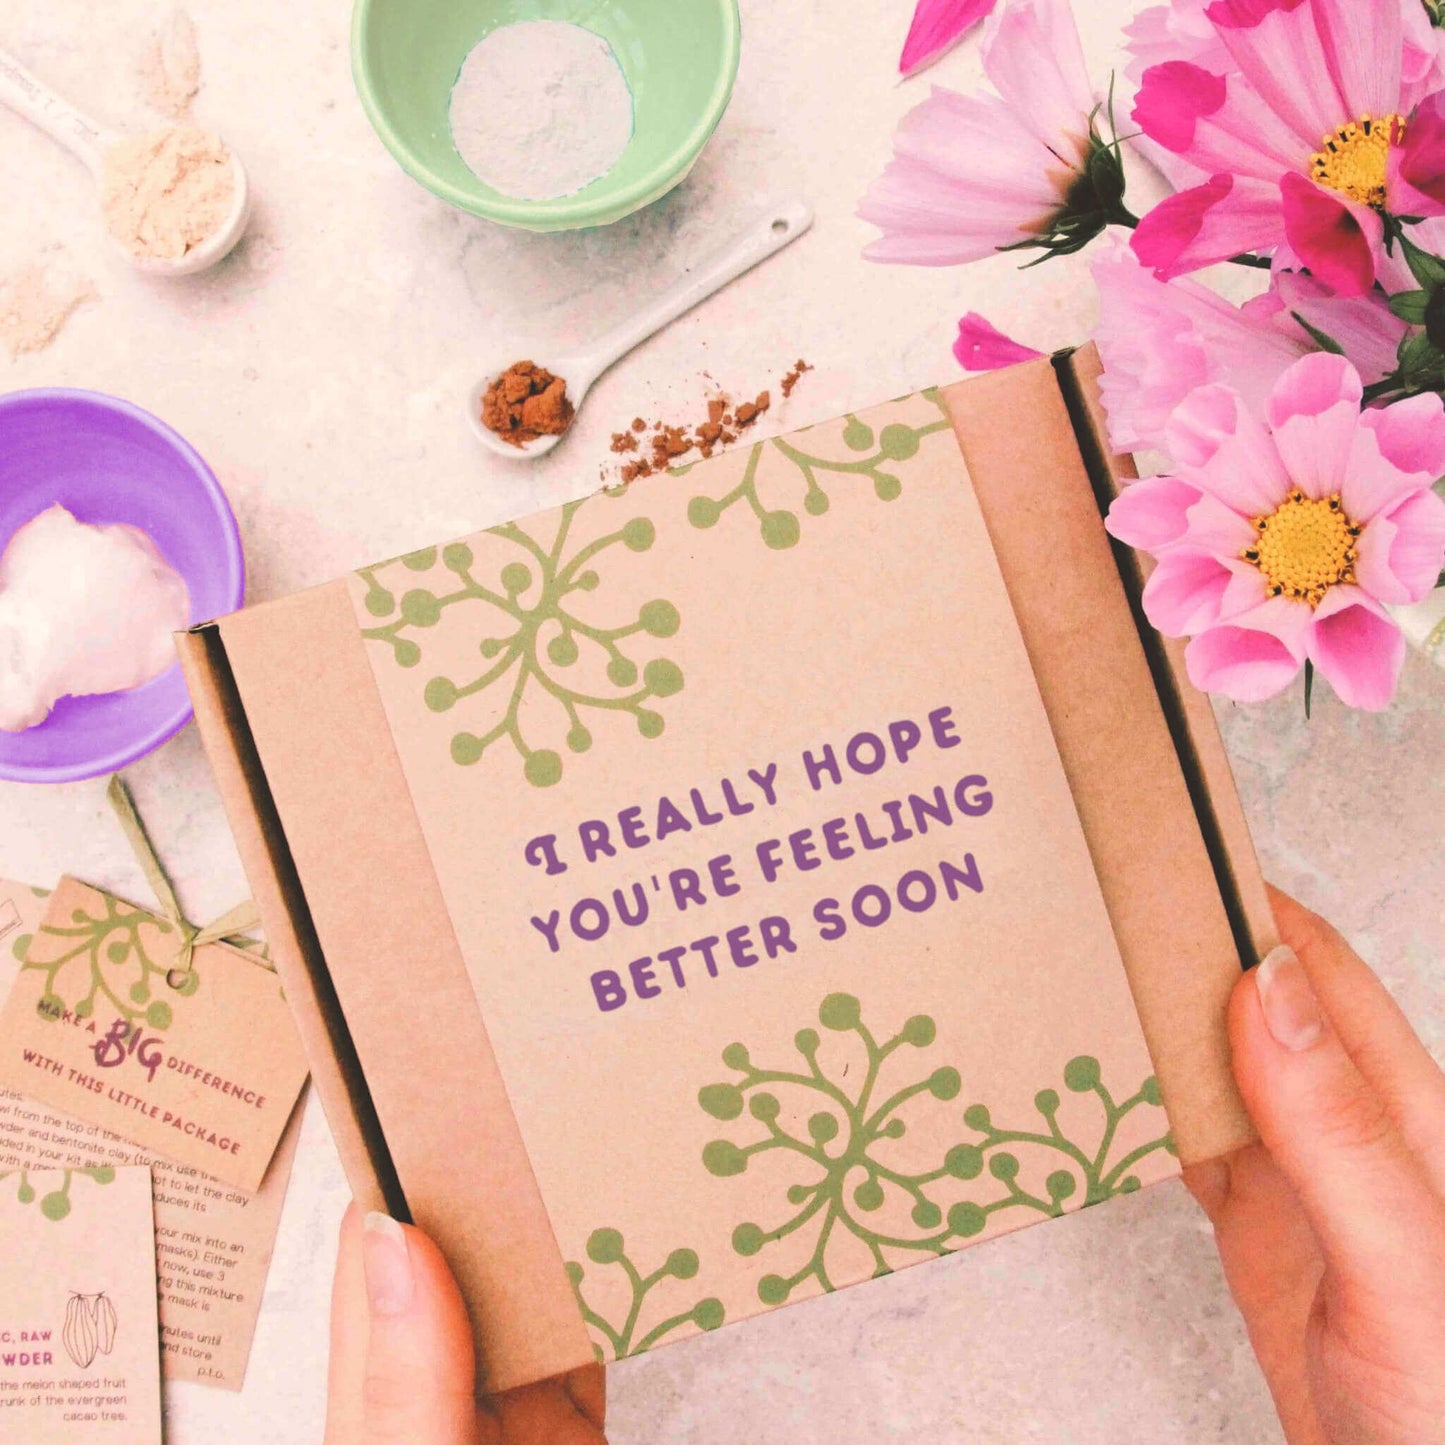 get well soon letterbox gift with gift message 'i really hope you're feeling better soon'